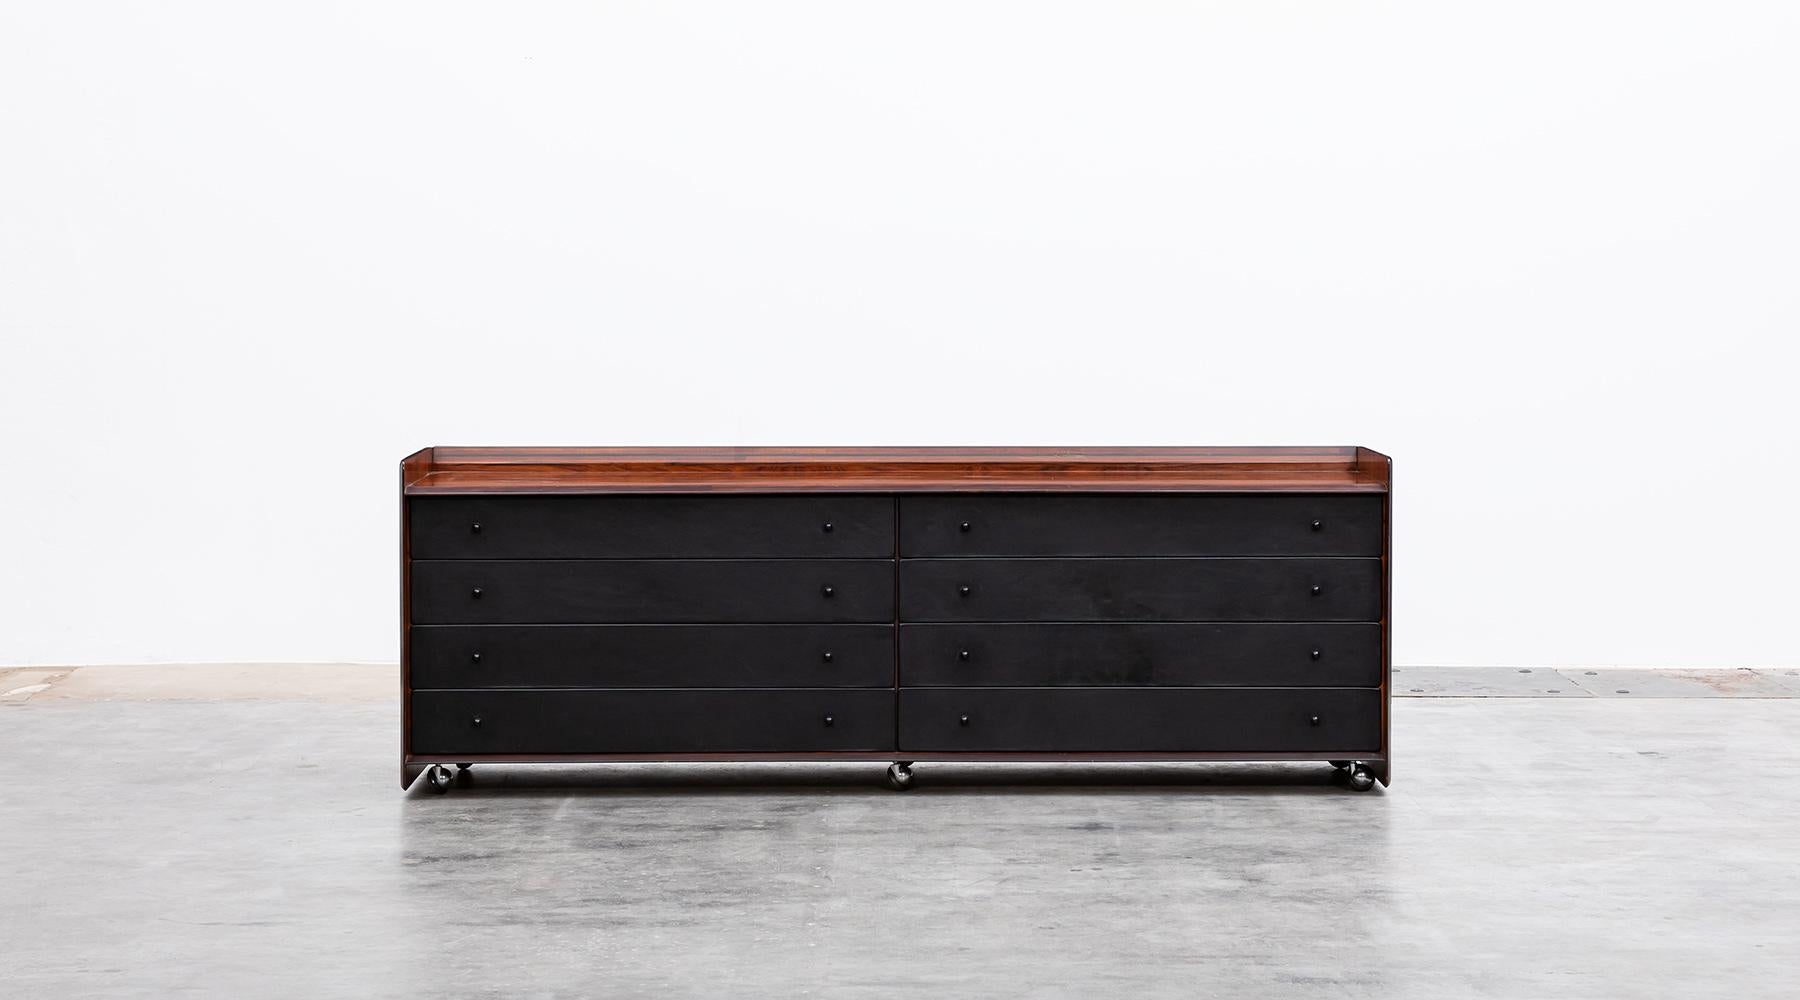 Sideboard, Afra and Tobia Scarpa, walnut and leather, Italy, circa 1975.

Handsome Cabinet in walnut with eight leather drawers decorated with small round wooden handles. Comes in good original condition. Manufactured by Maxalto. Afra and Tobia